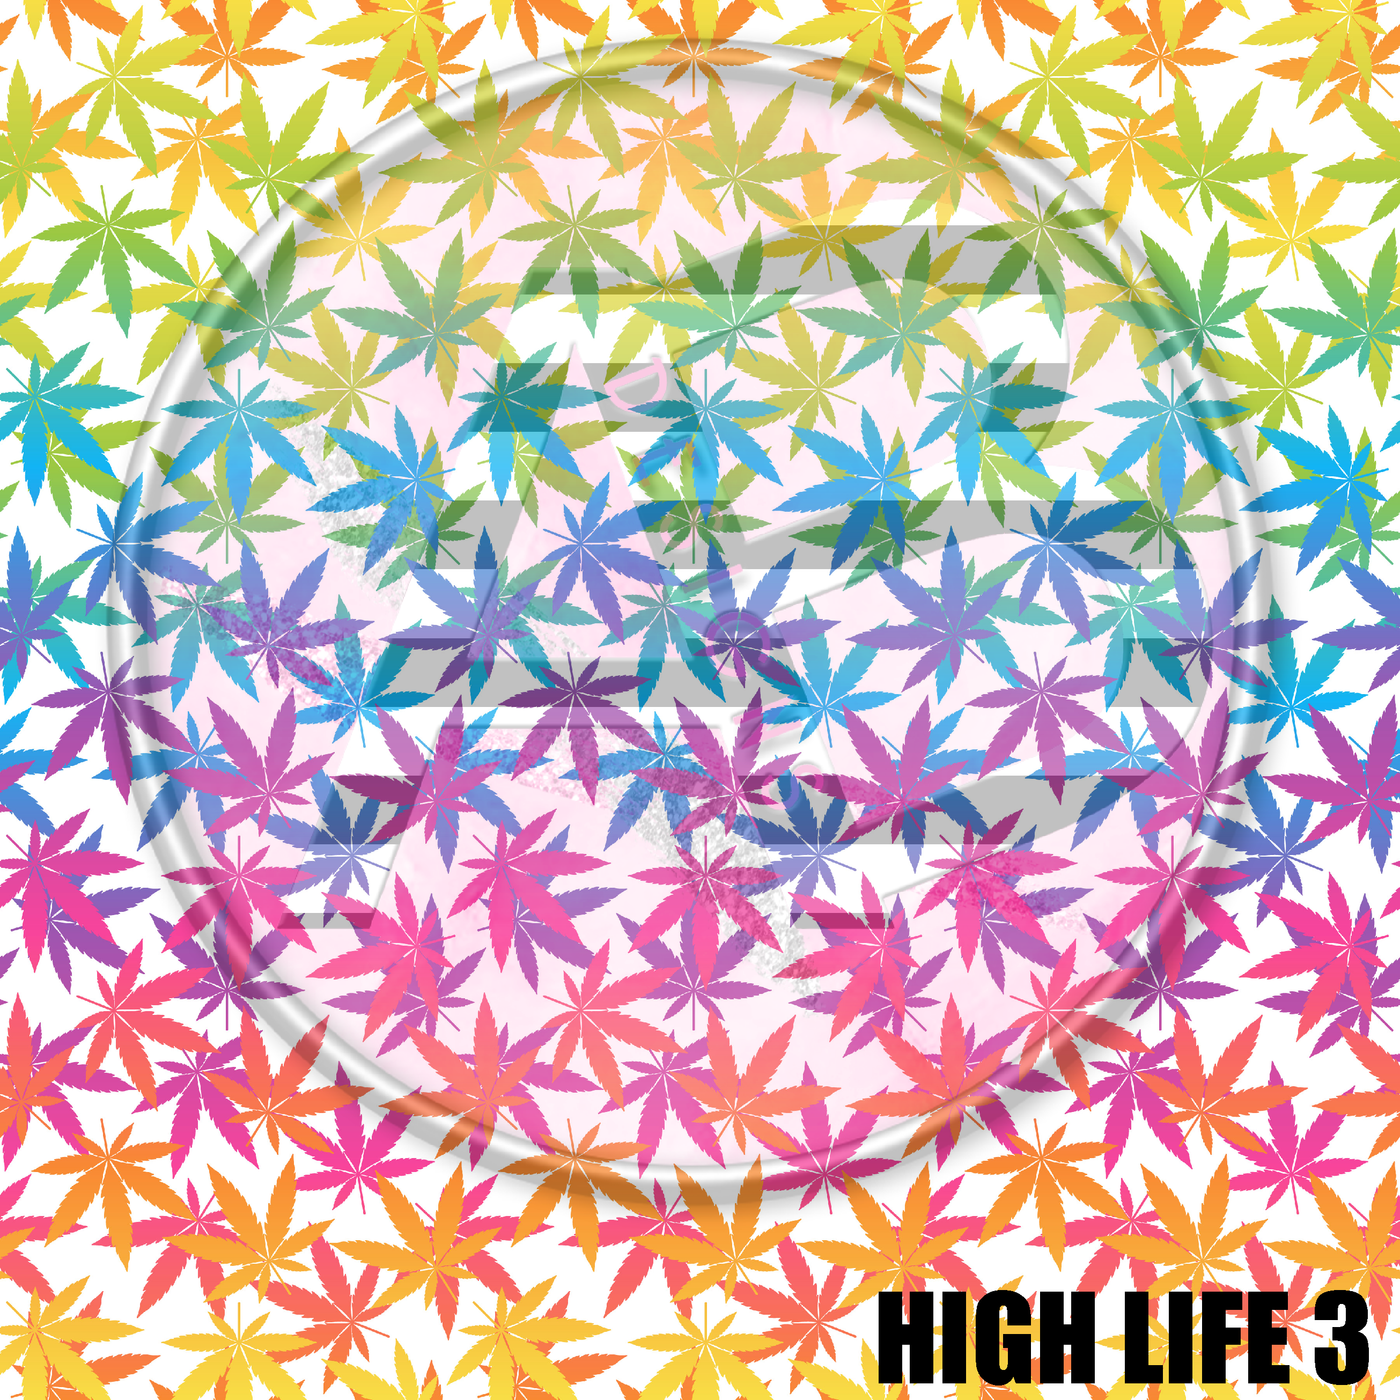 Adhesive Patterned Vinyl - High Life 3